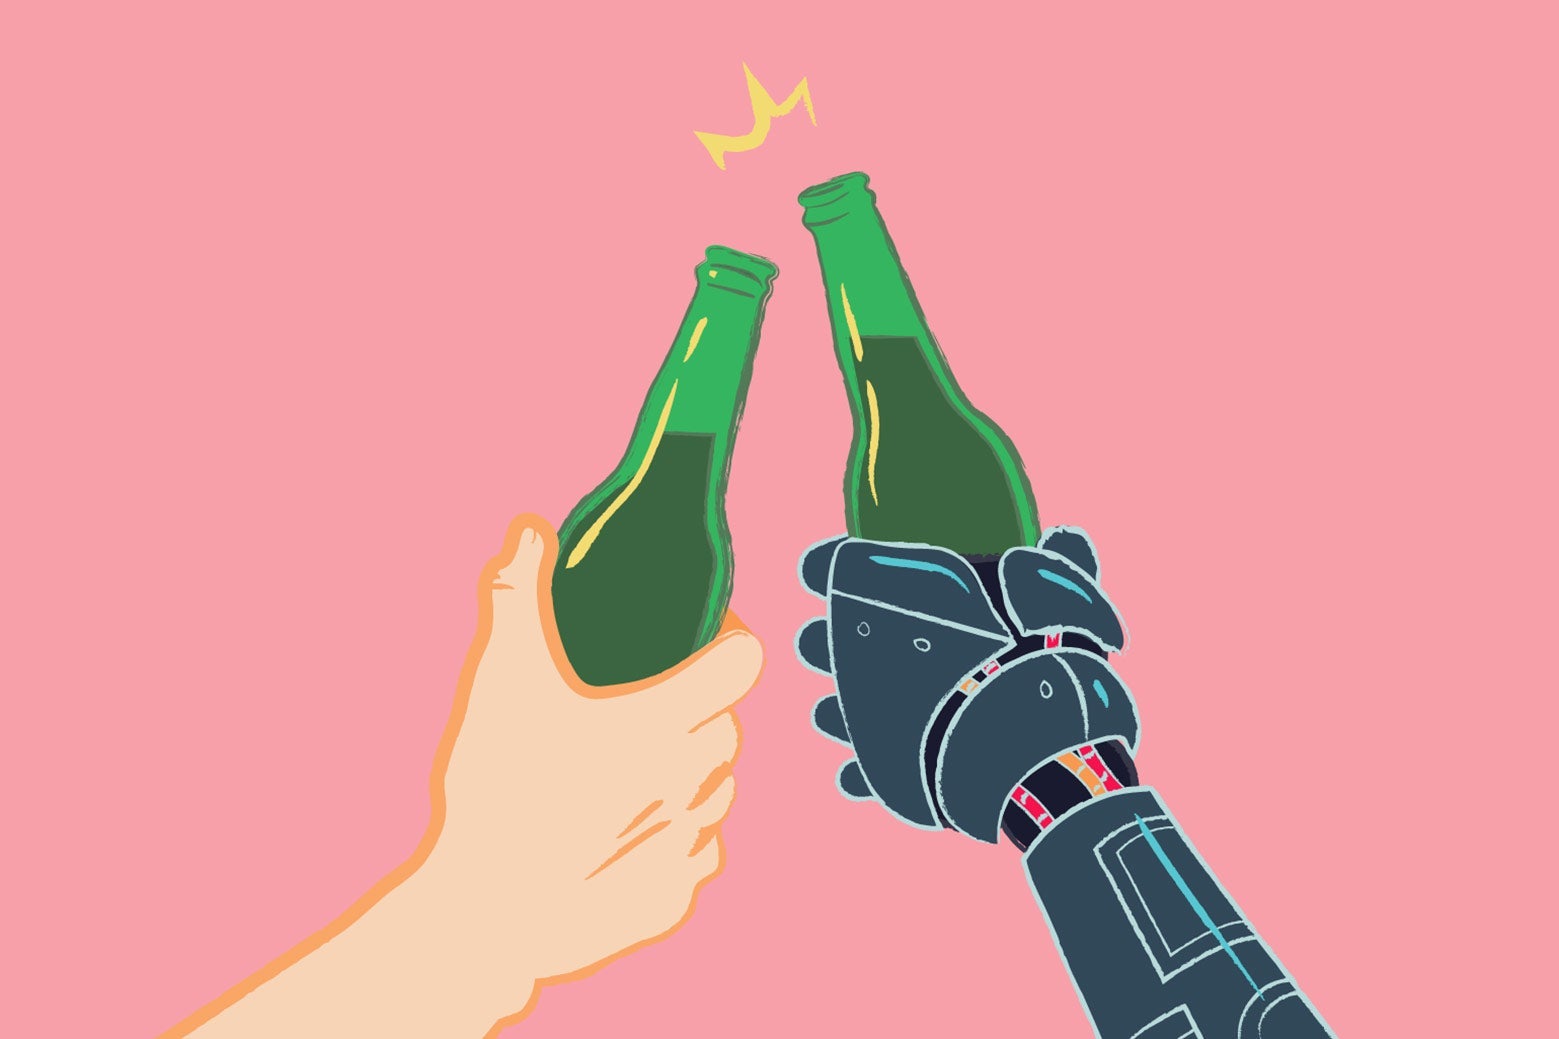 A human hand and a robot hand toasting with bottled beers.